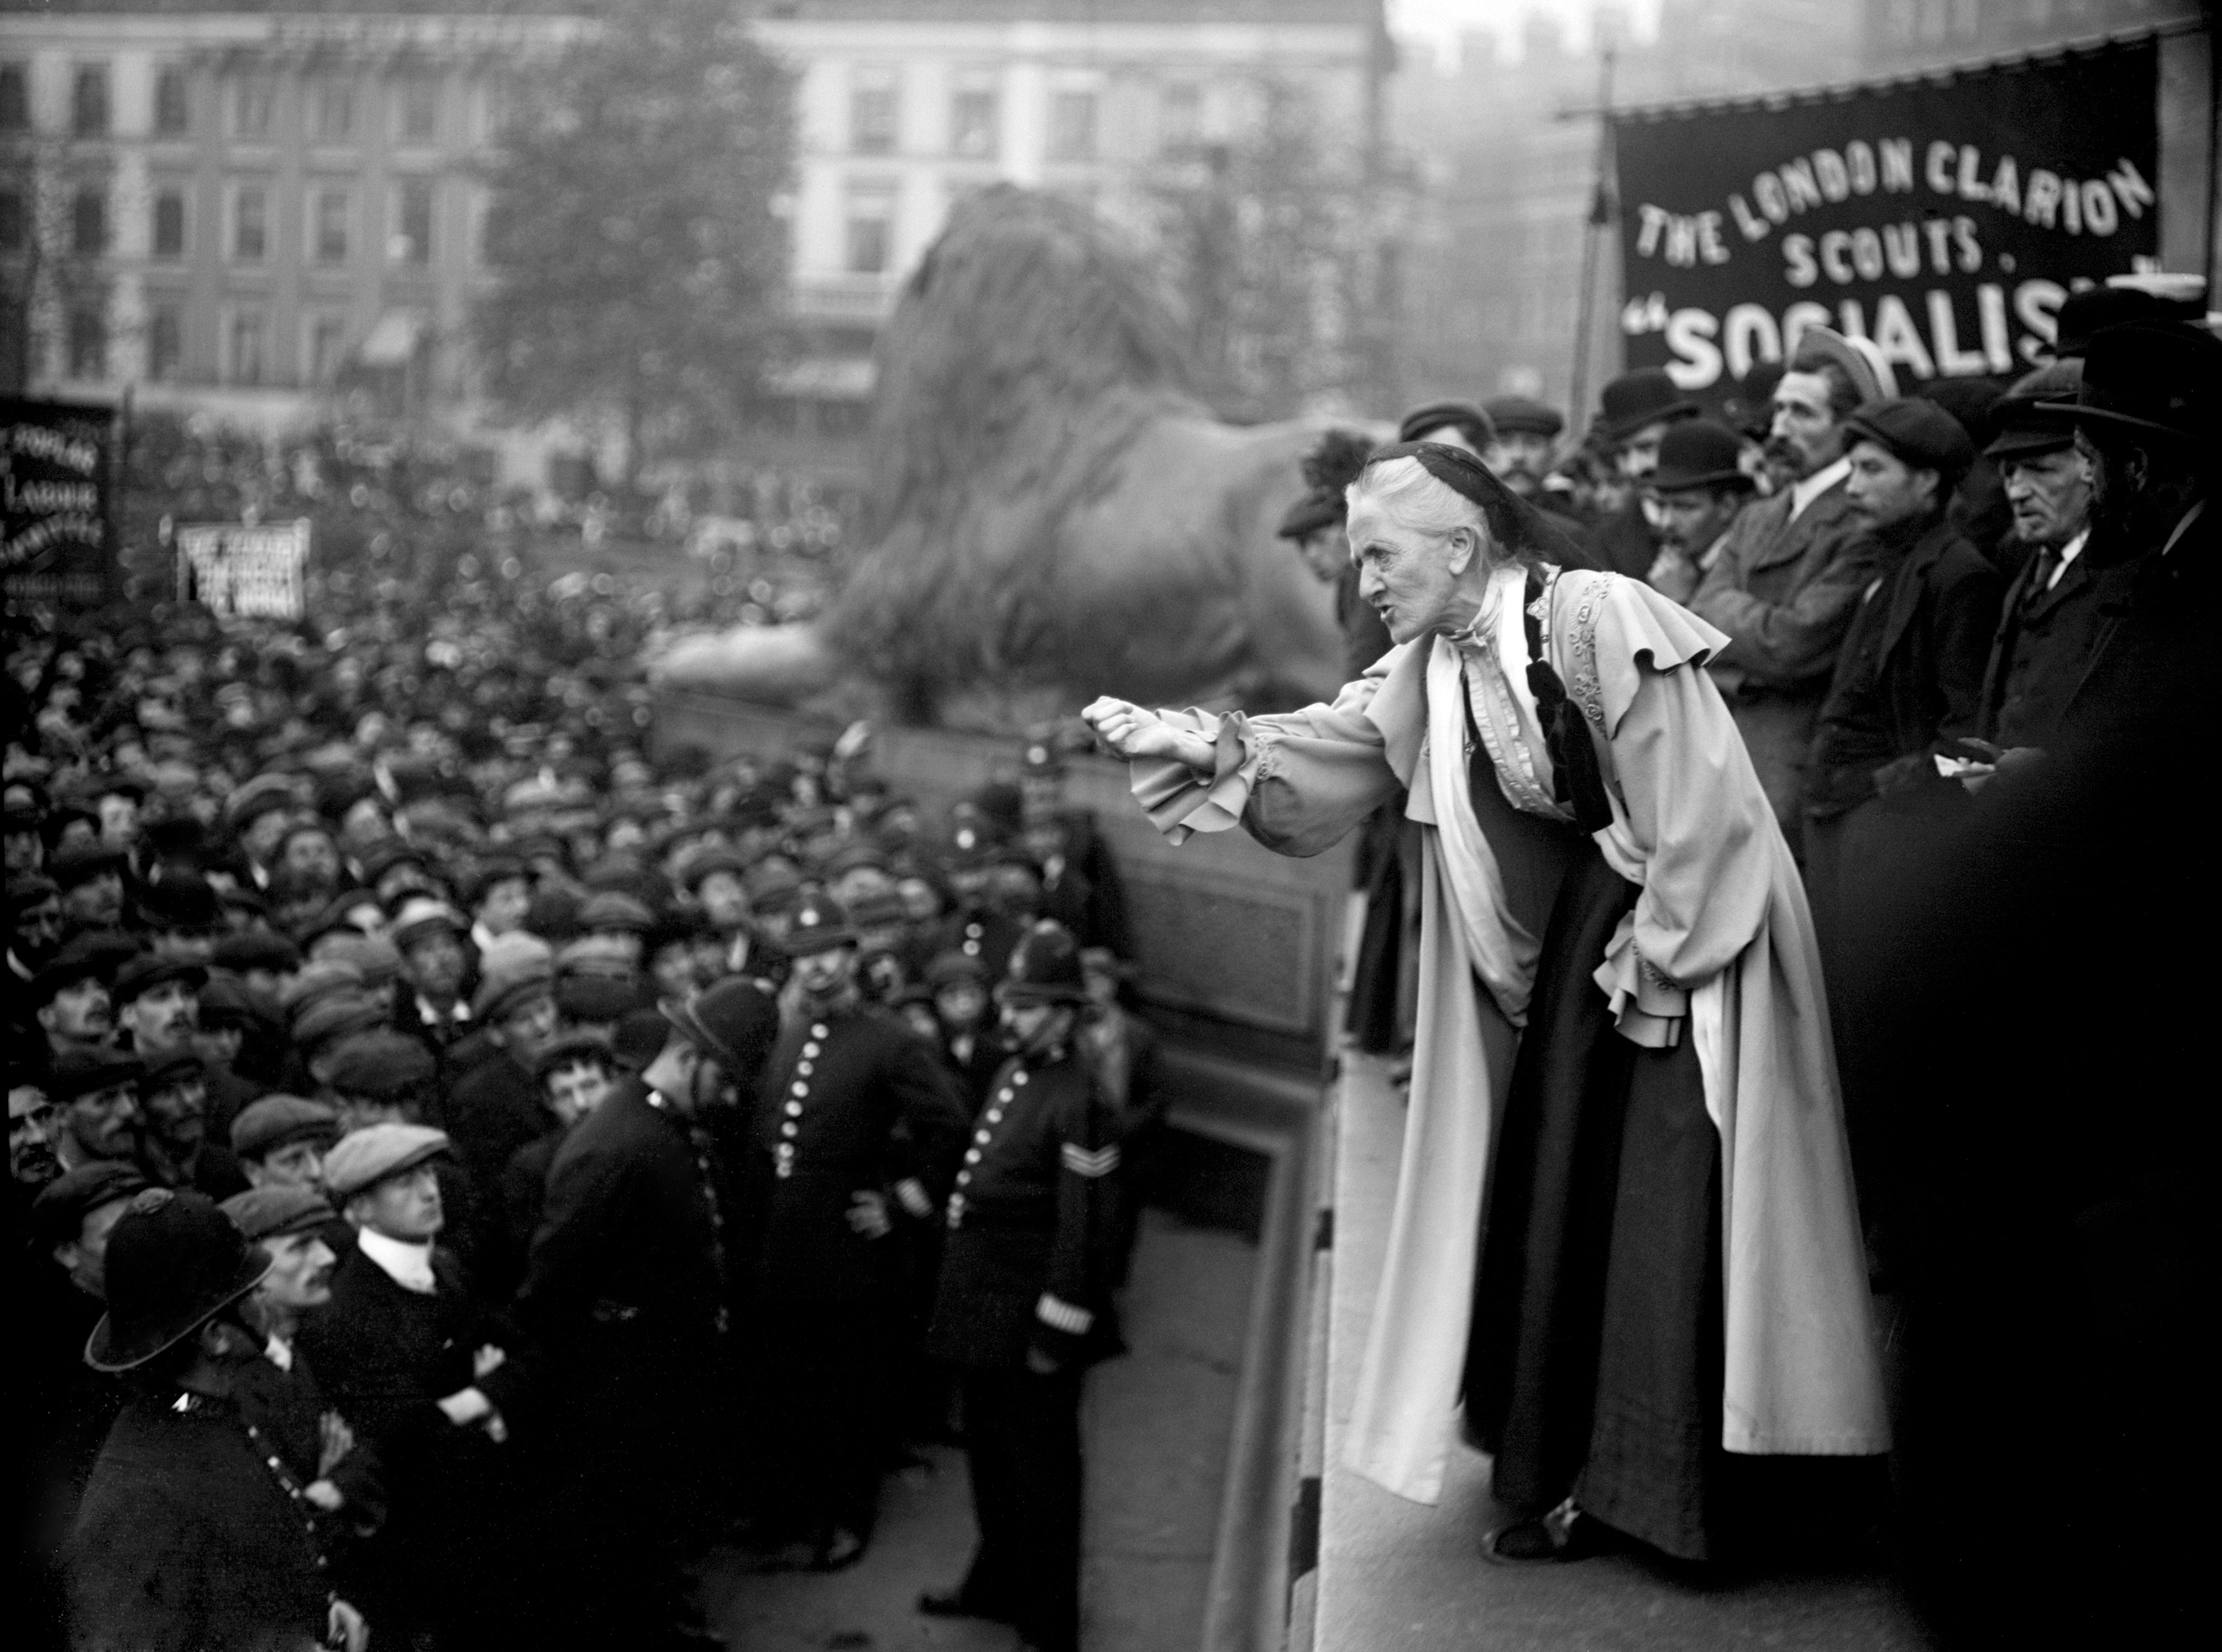 An older woman speaks to male and female crowd with lion statues in the background